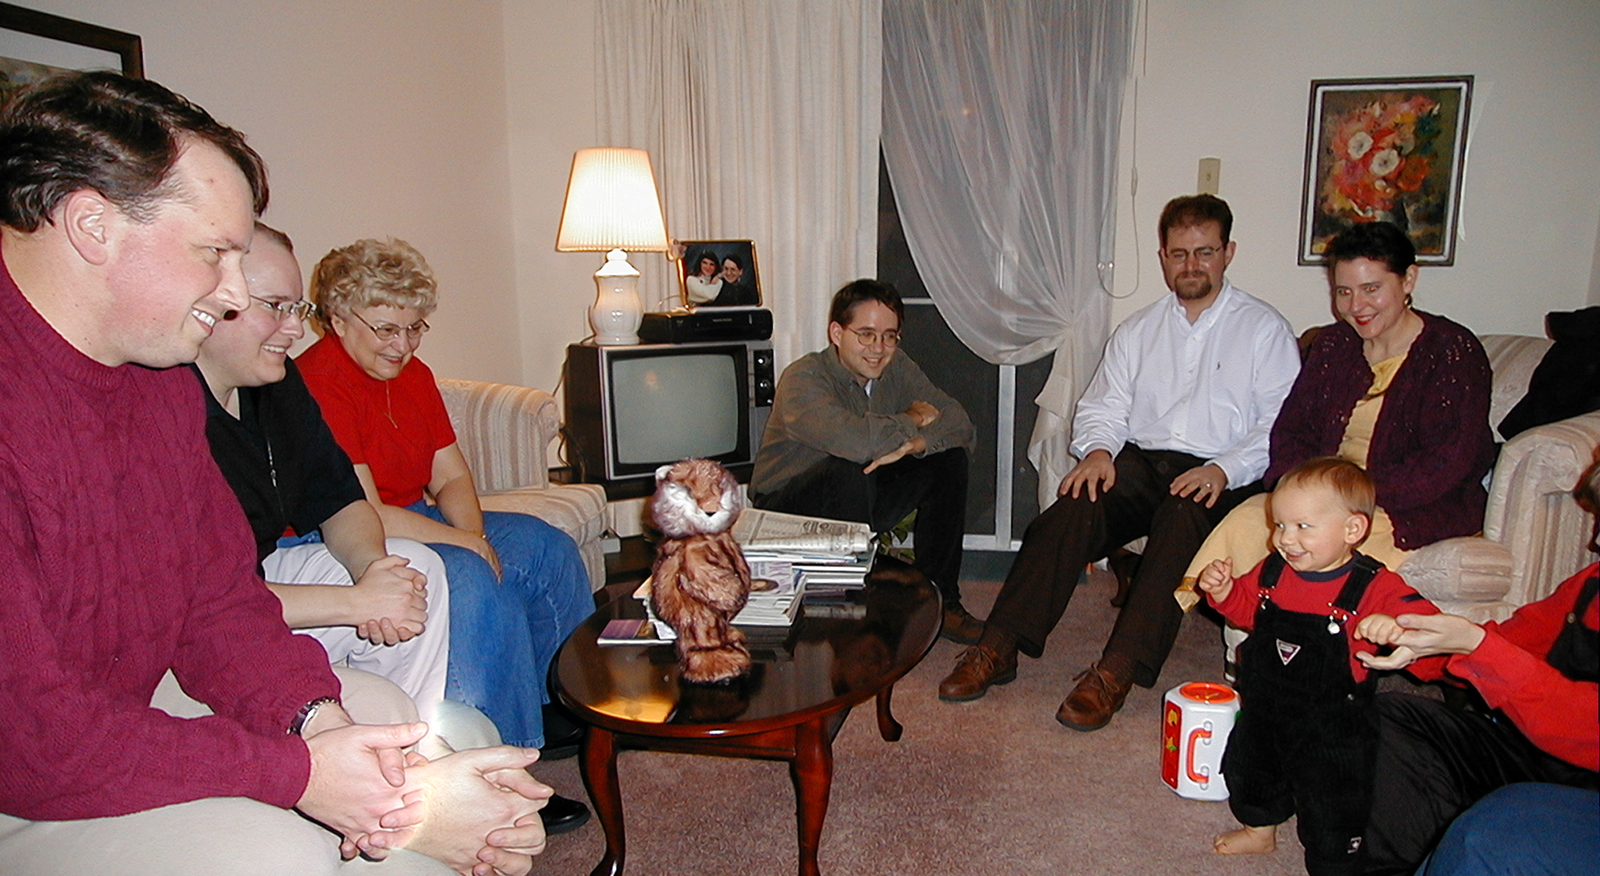 Paul, Marc, Mom, Robert, Steve and Jackie admiring baby Miles at Aunt Dory's apartment